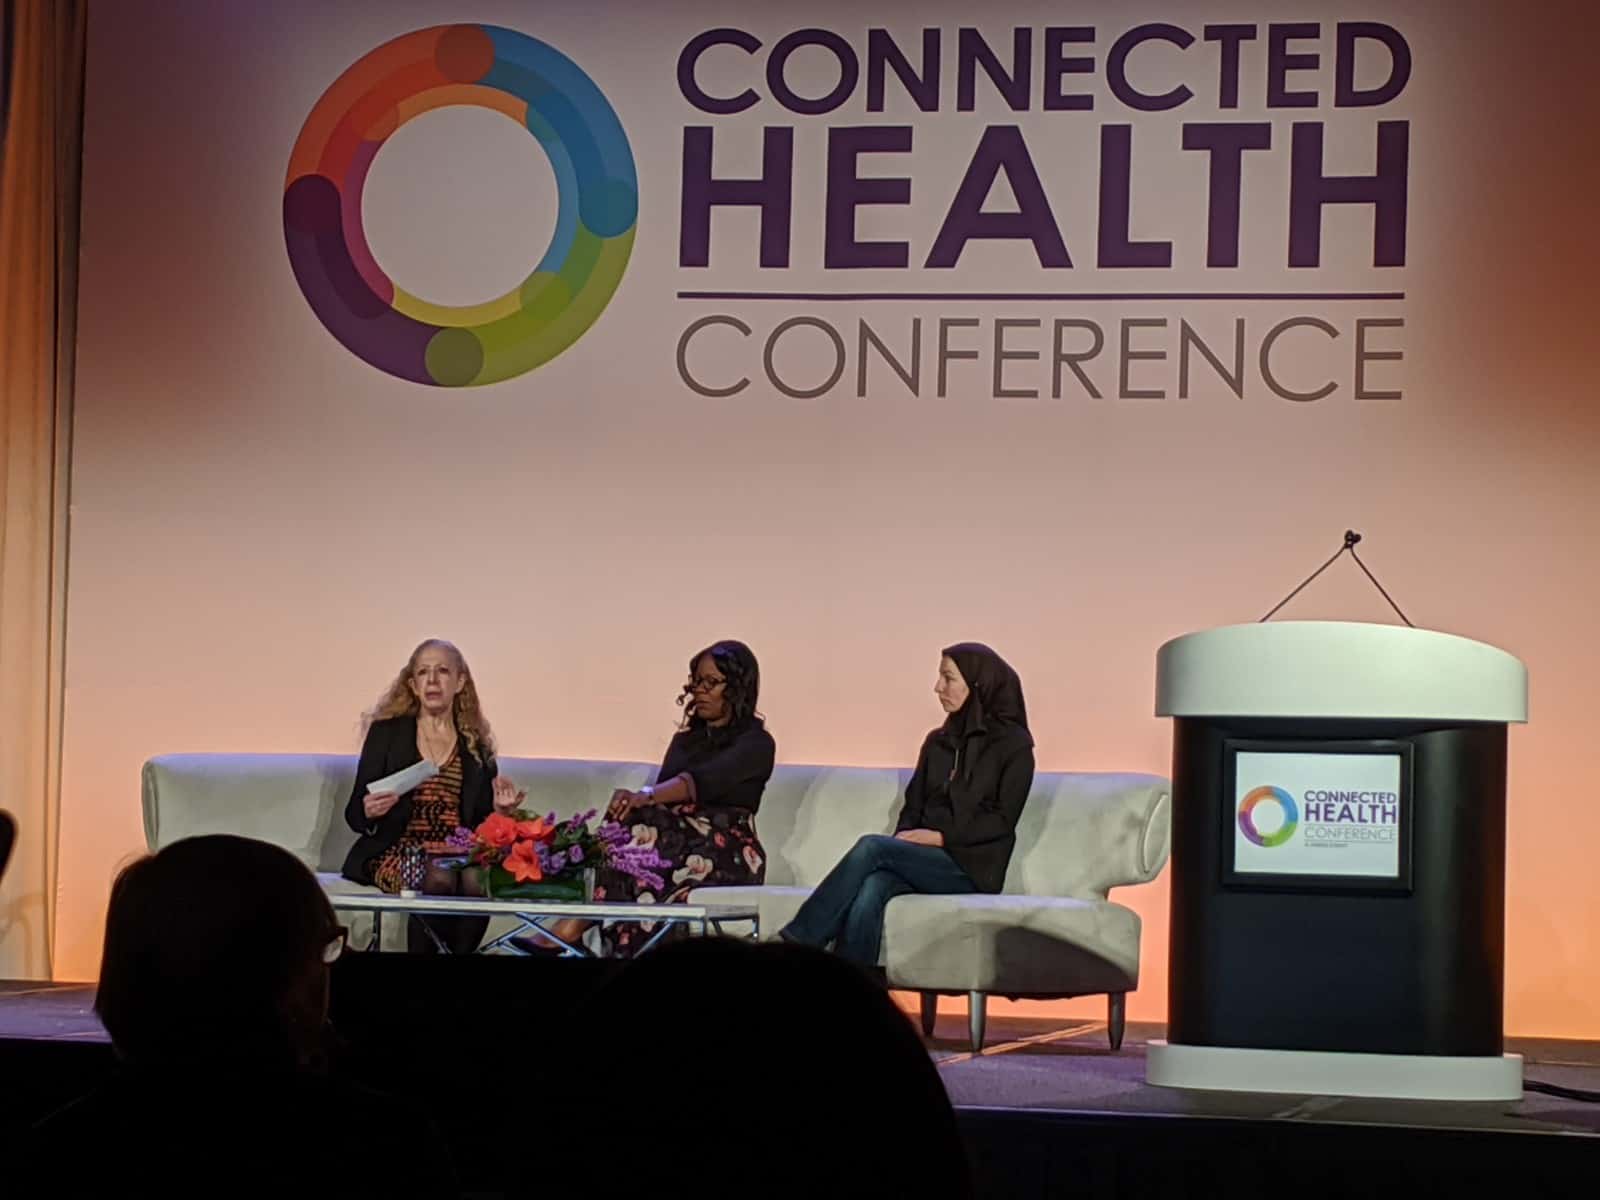 Connected Health Conference 2019: Design Focus Matters for Products and Conferences